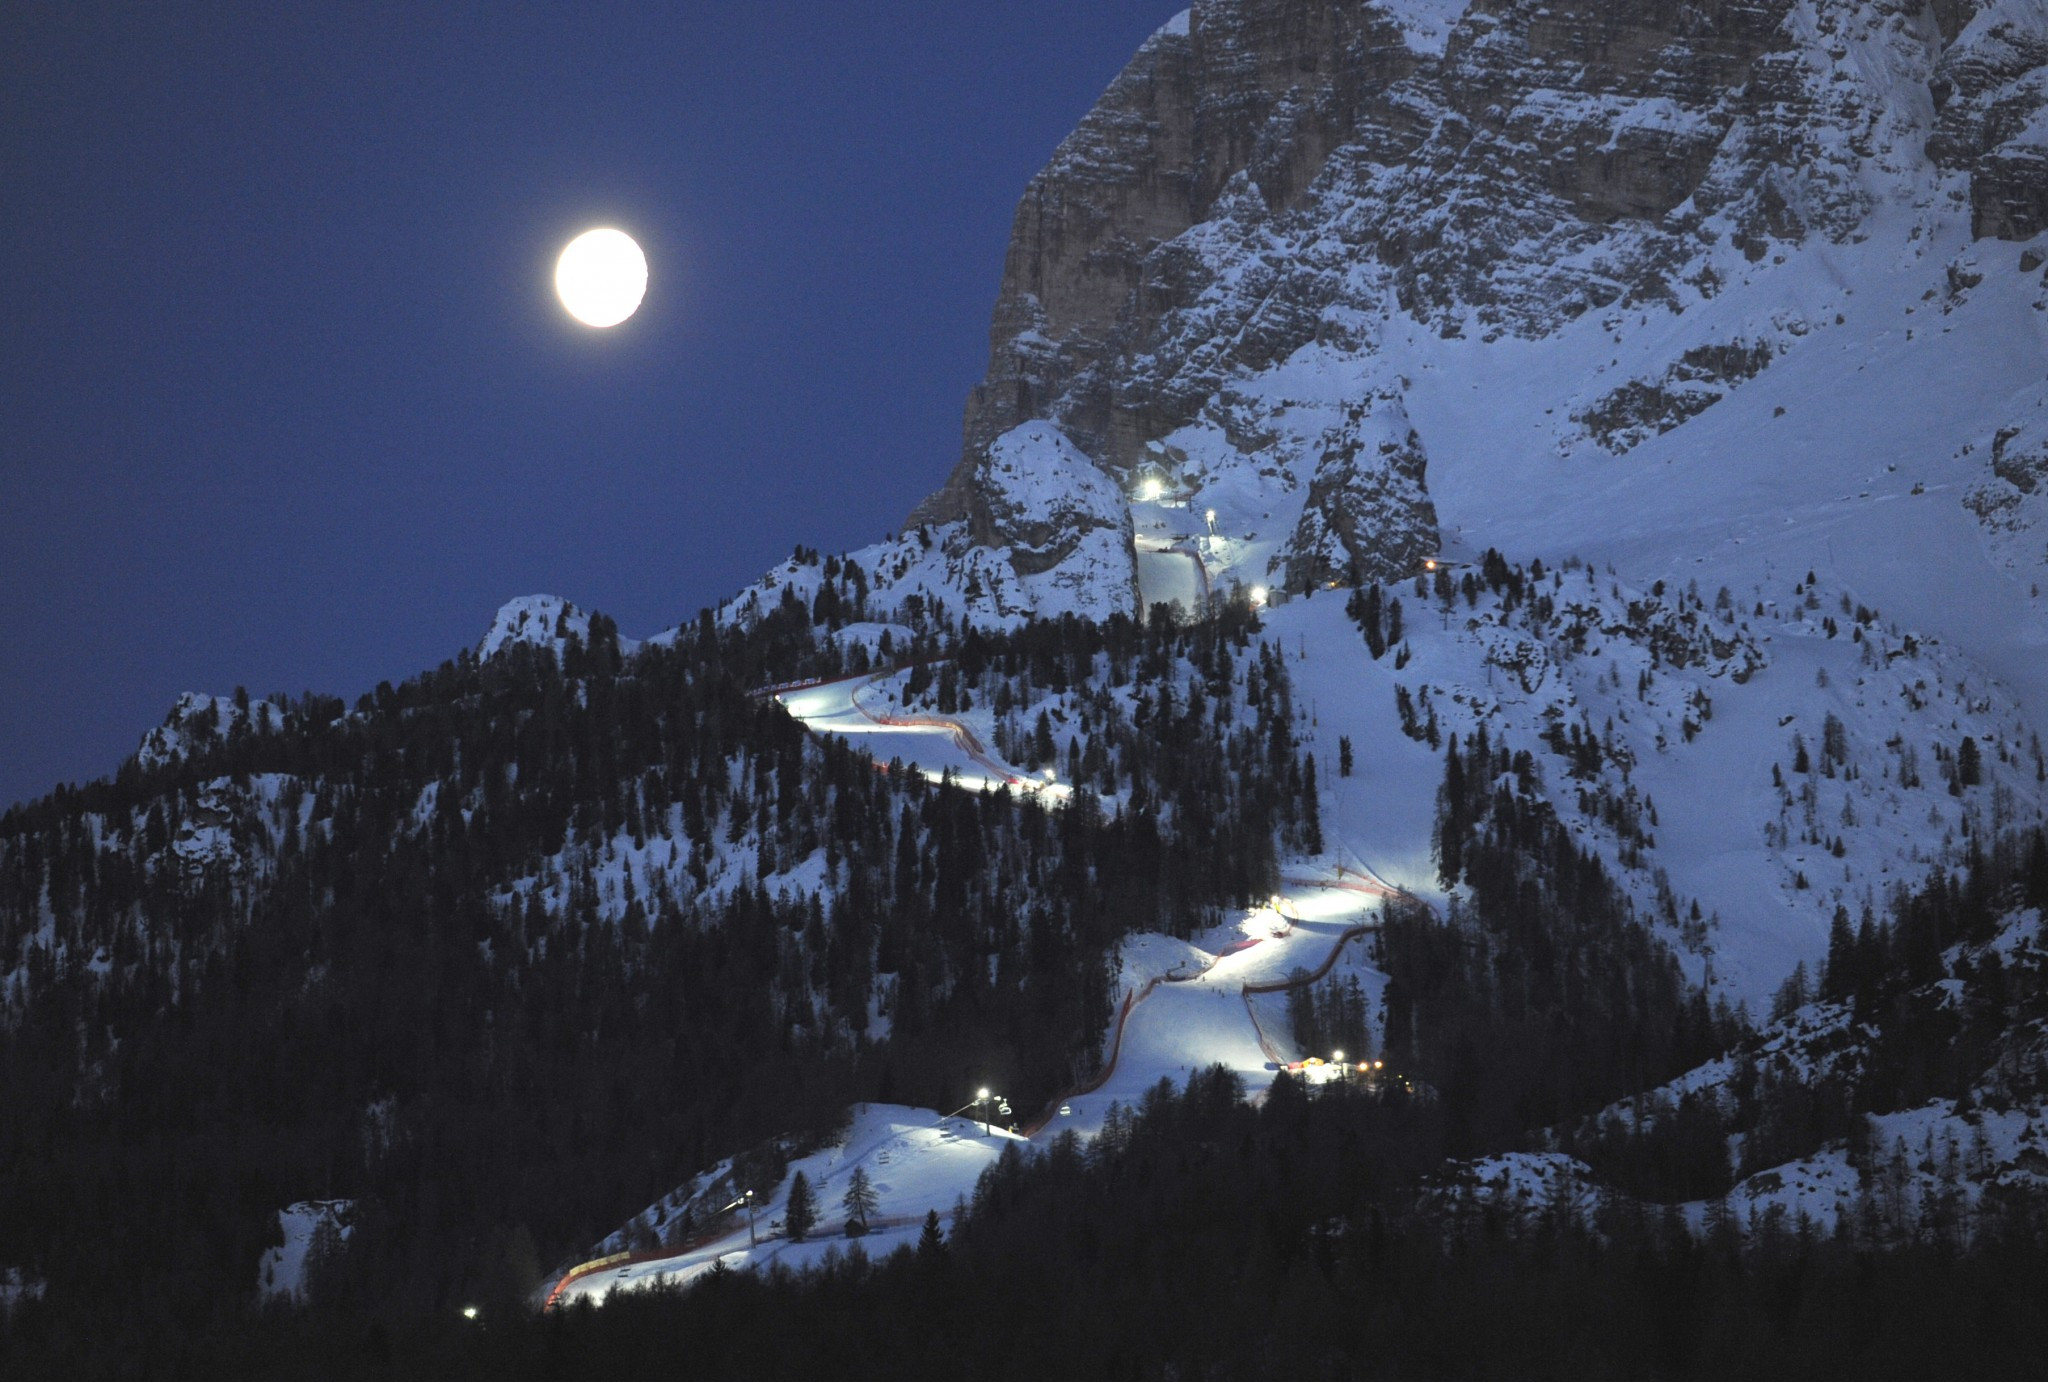 Construction work has officially begun on the technical "Vertigine" course at the site of the 2021 FIS Alpine World Ski Championships in Italian town Cortina d’Ampezzo ©Getty Images